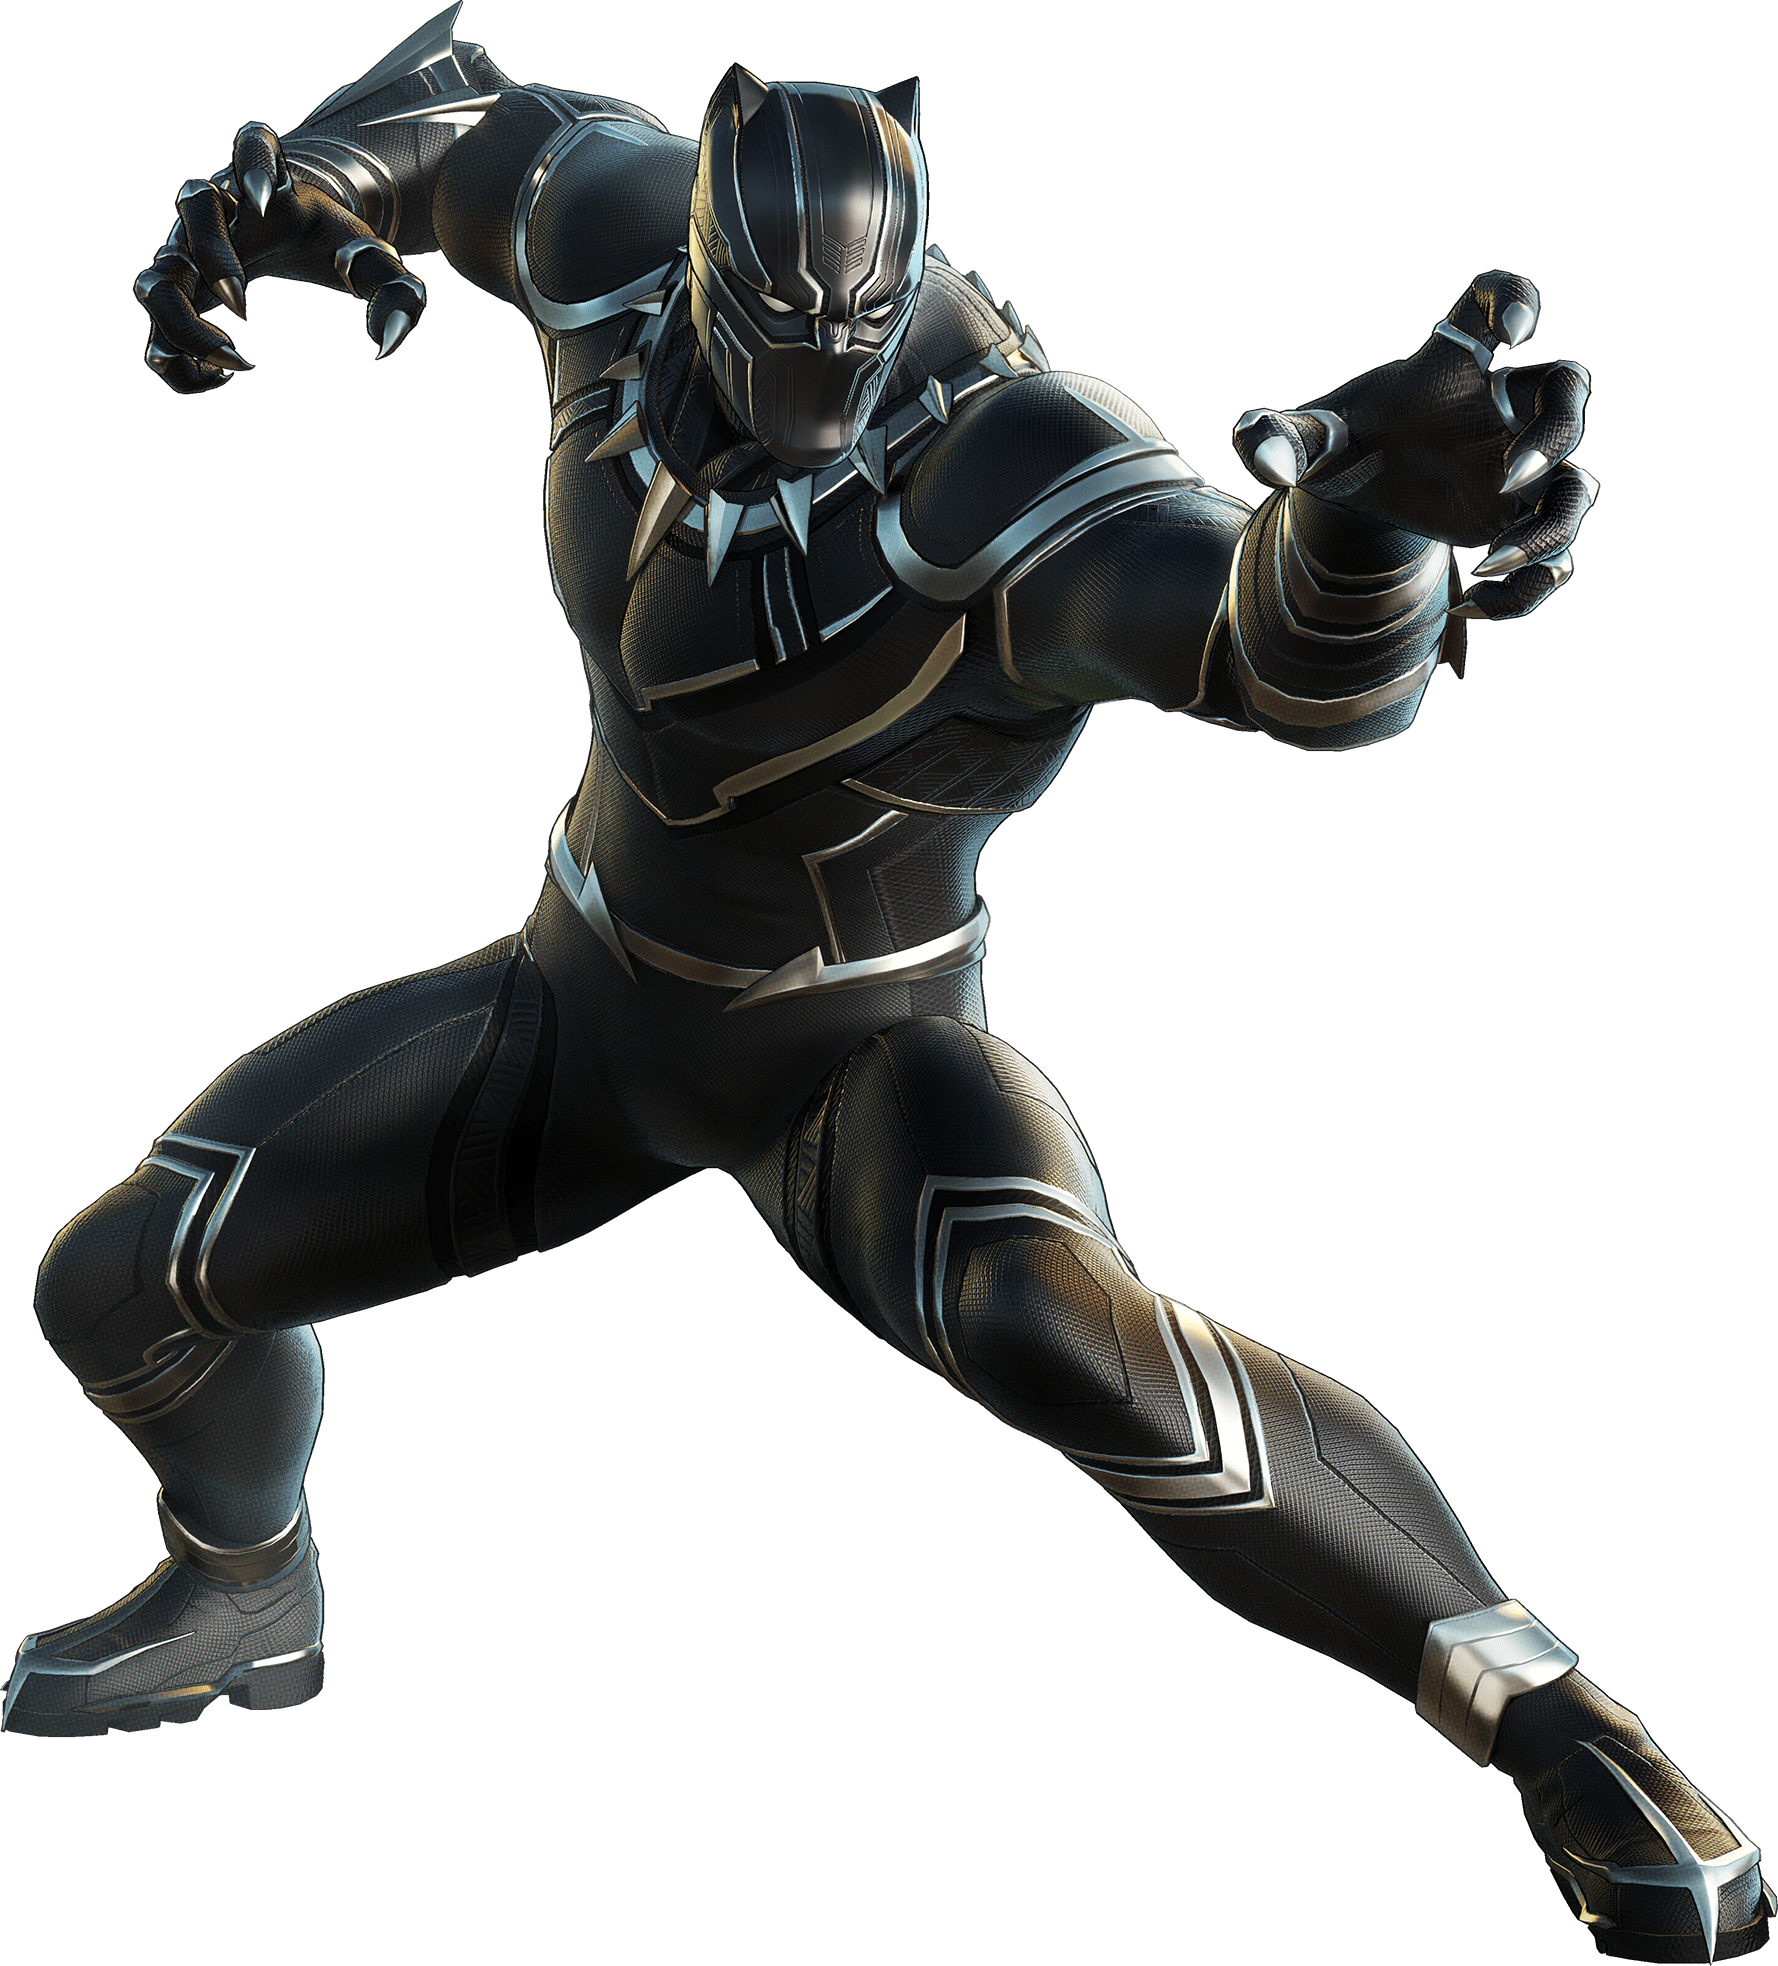 https://static.wikia.nocookie.net/mua/images/f/fa/MUA3_Black_Panther.png/revision/latest?cb=20190622013215